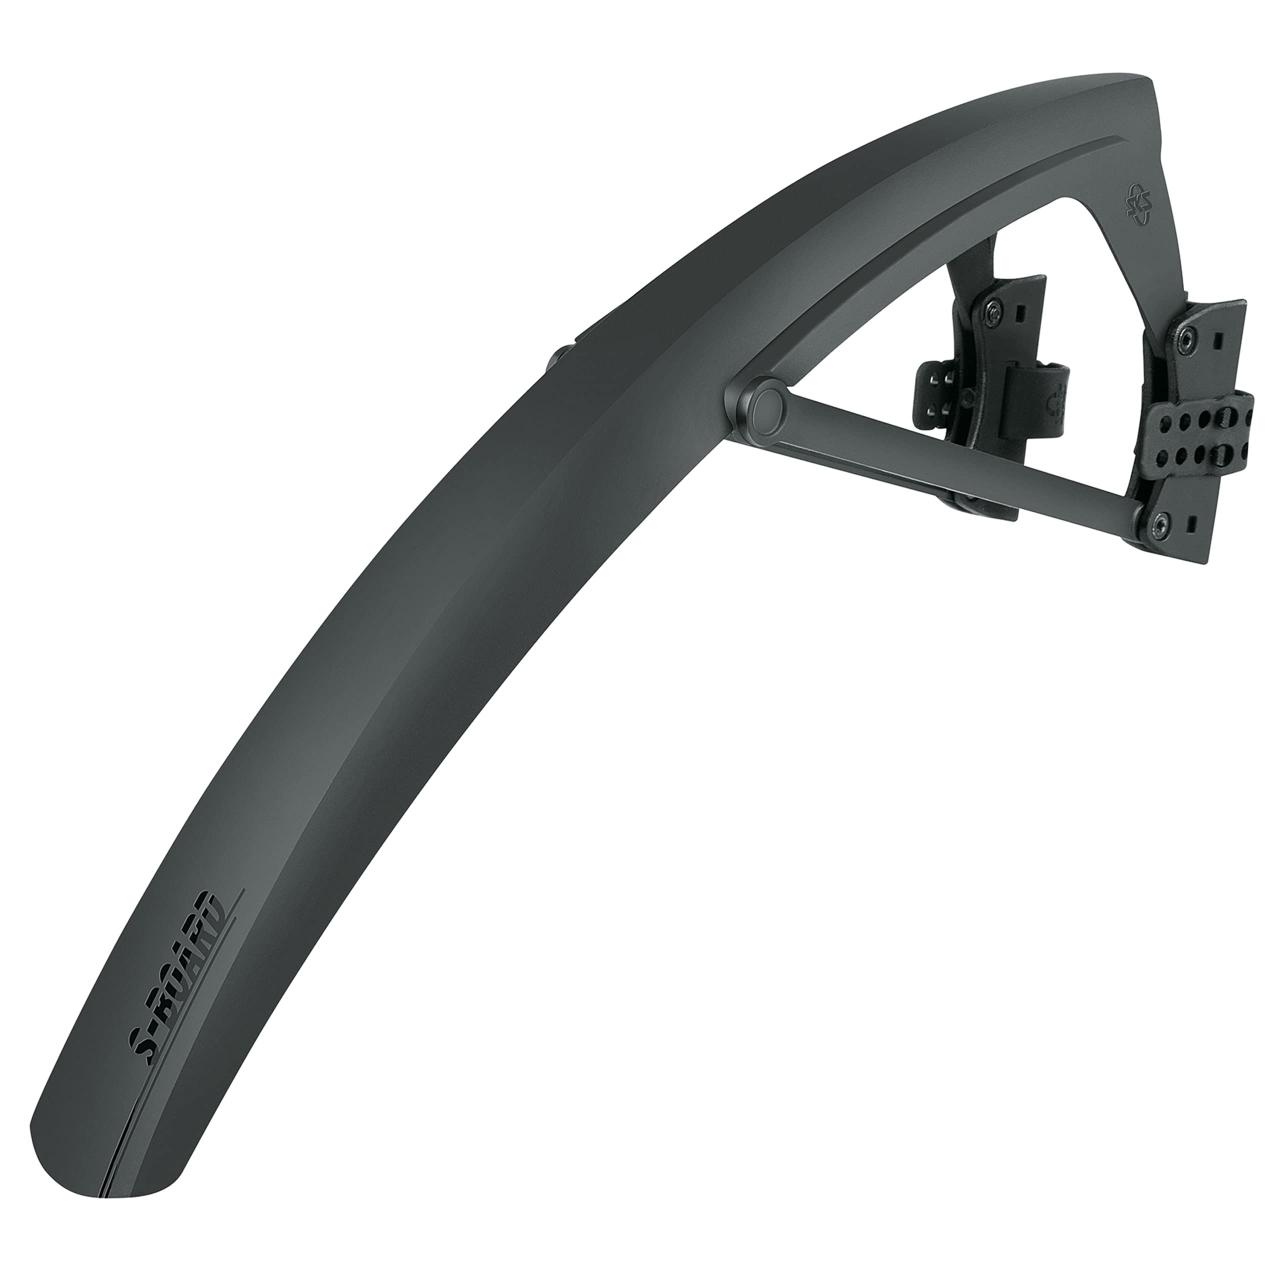 SKS-Germany 11317 S-Board Bicycle Front Fender, Black: SKS Germany:  Amazon.ae